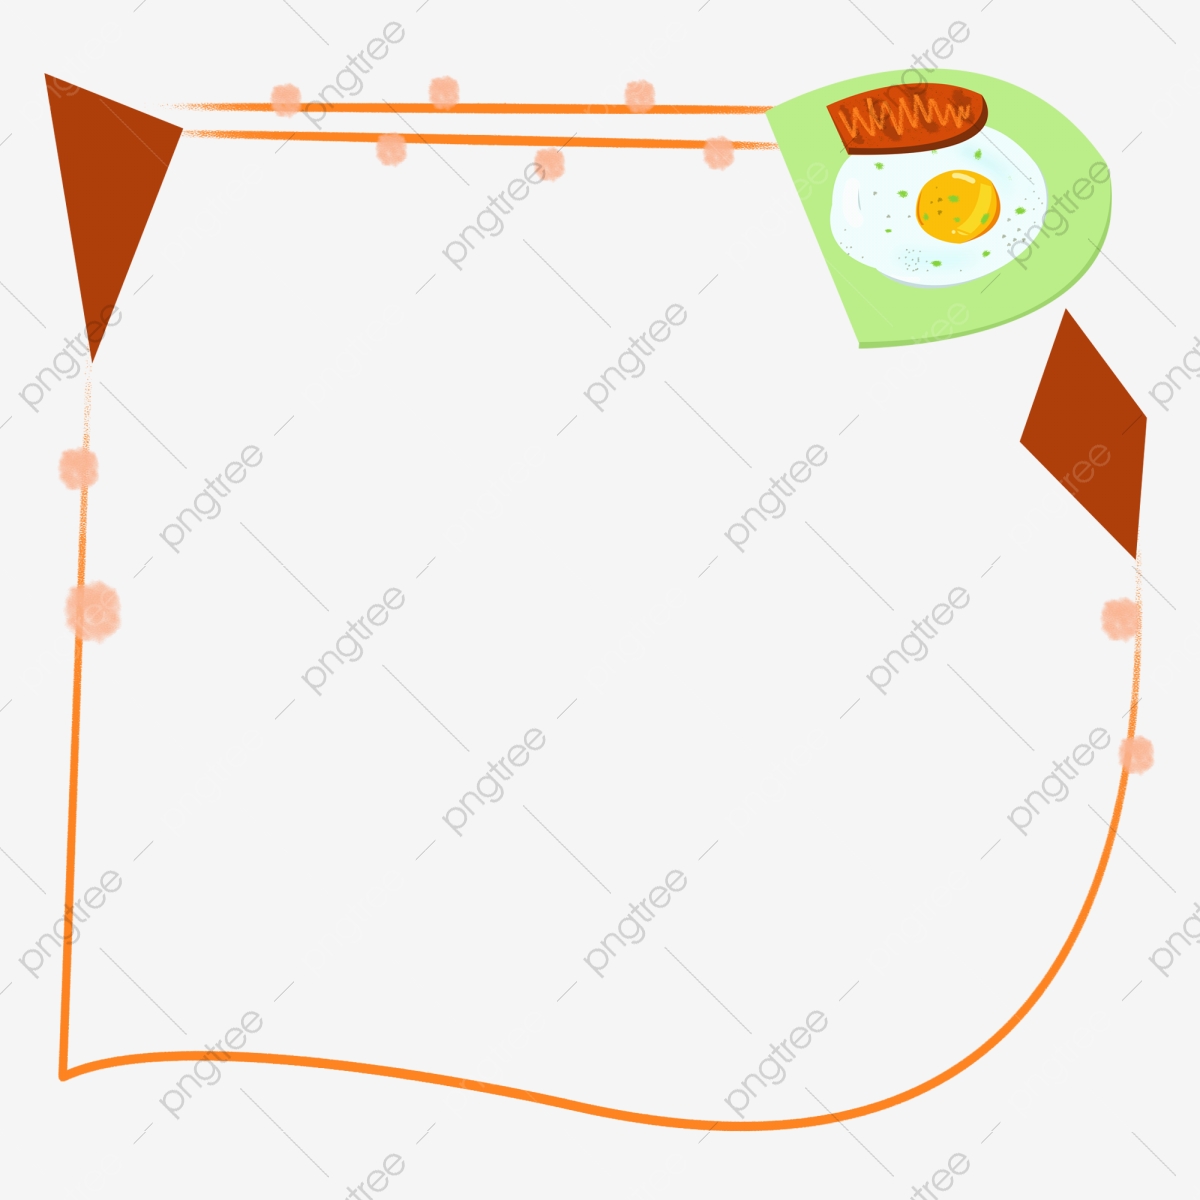 Breakfast Border cliparts image pack with transparent images